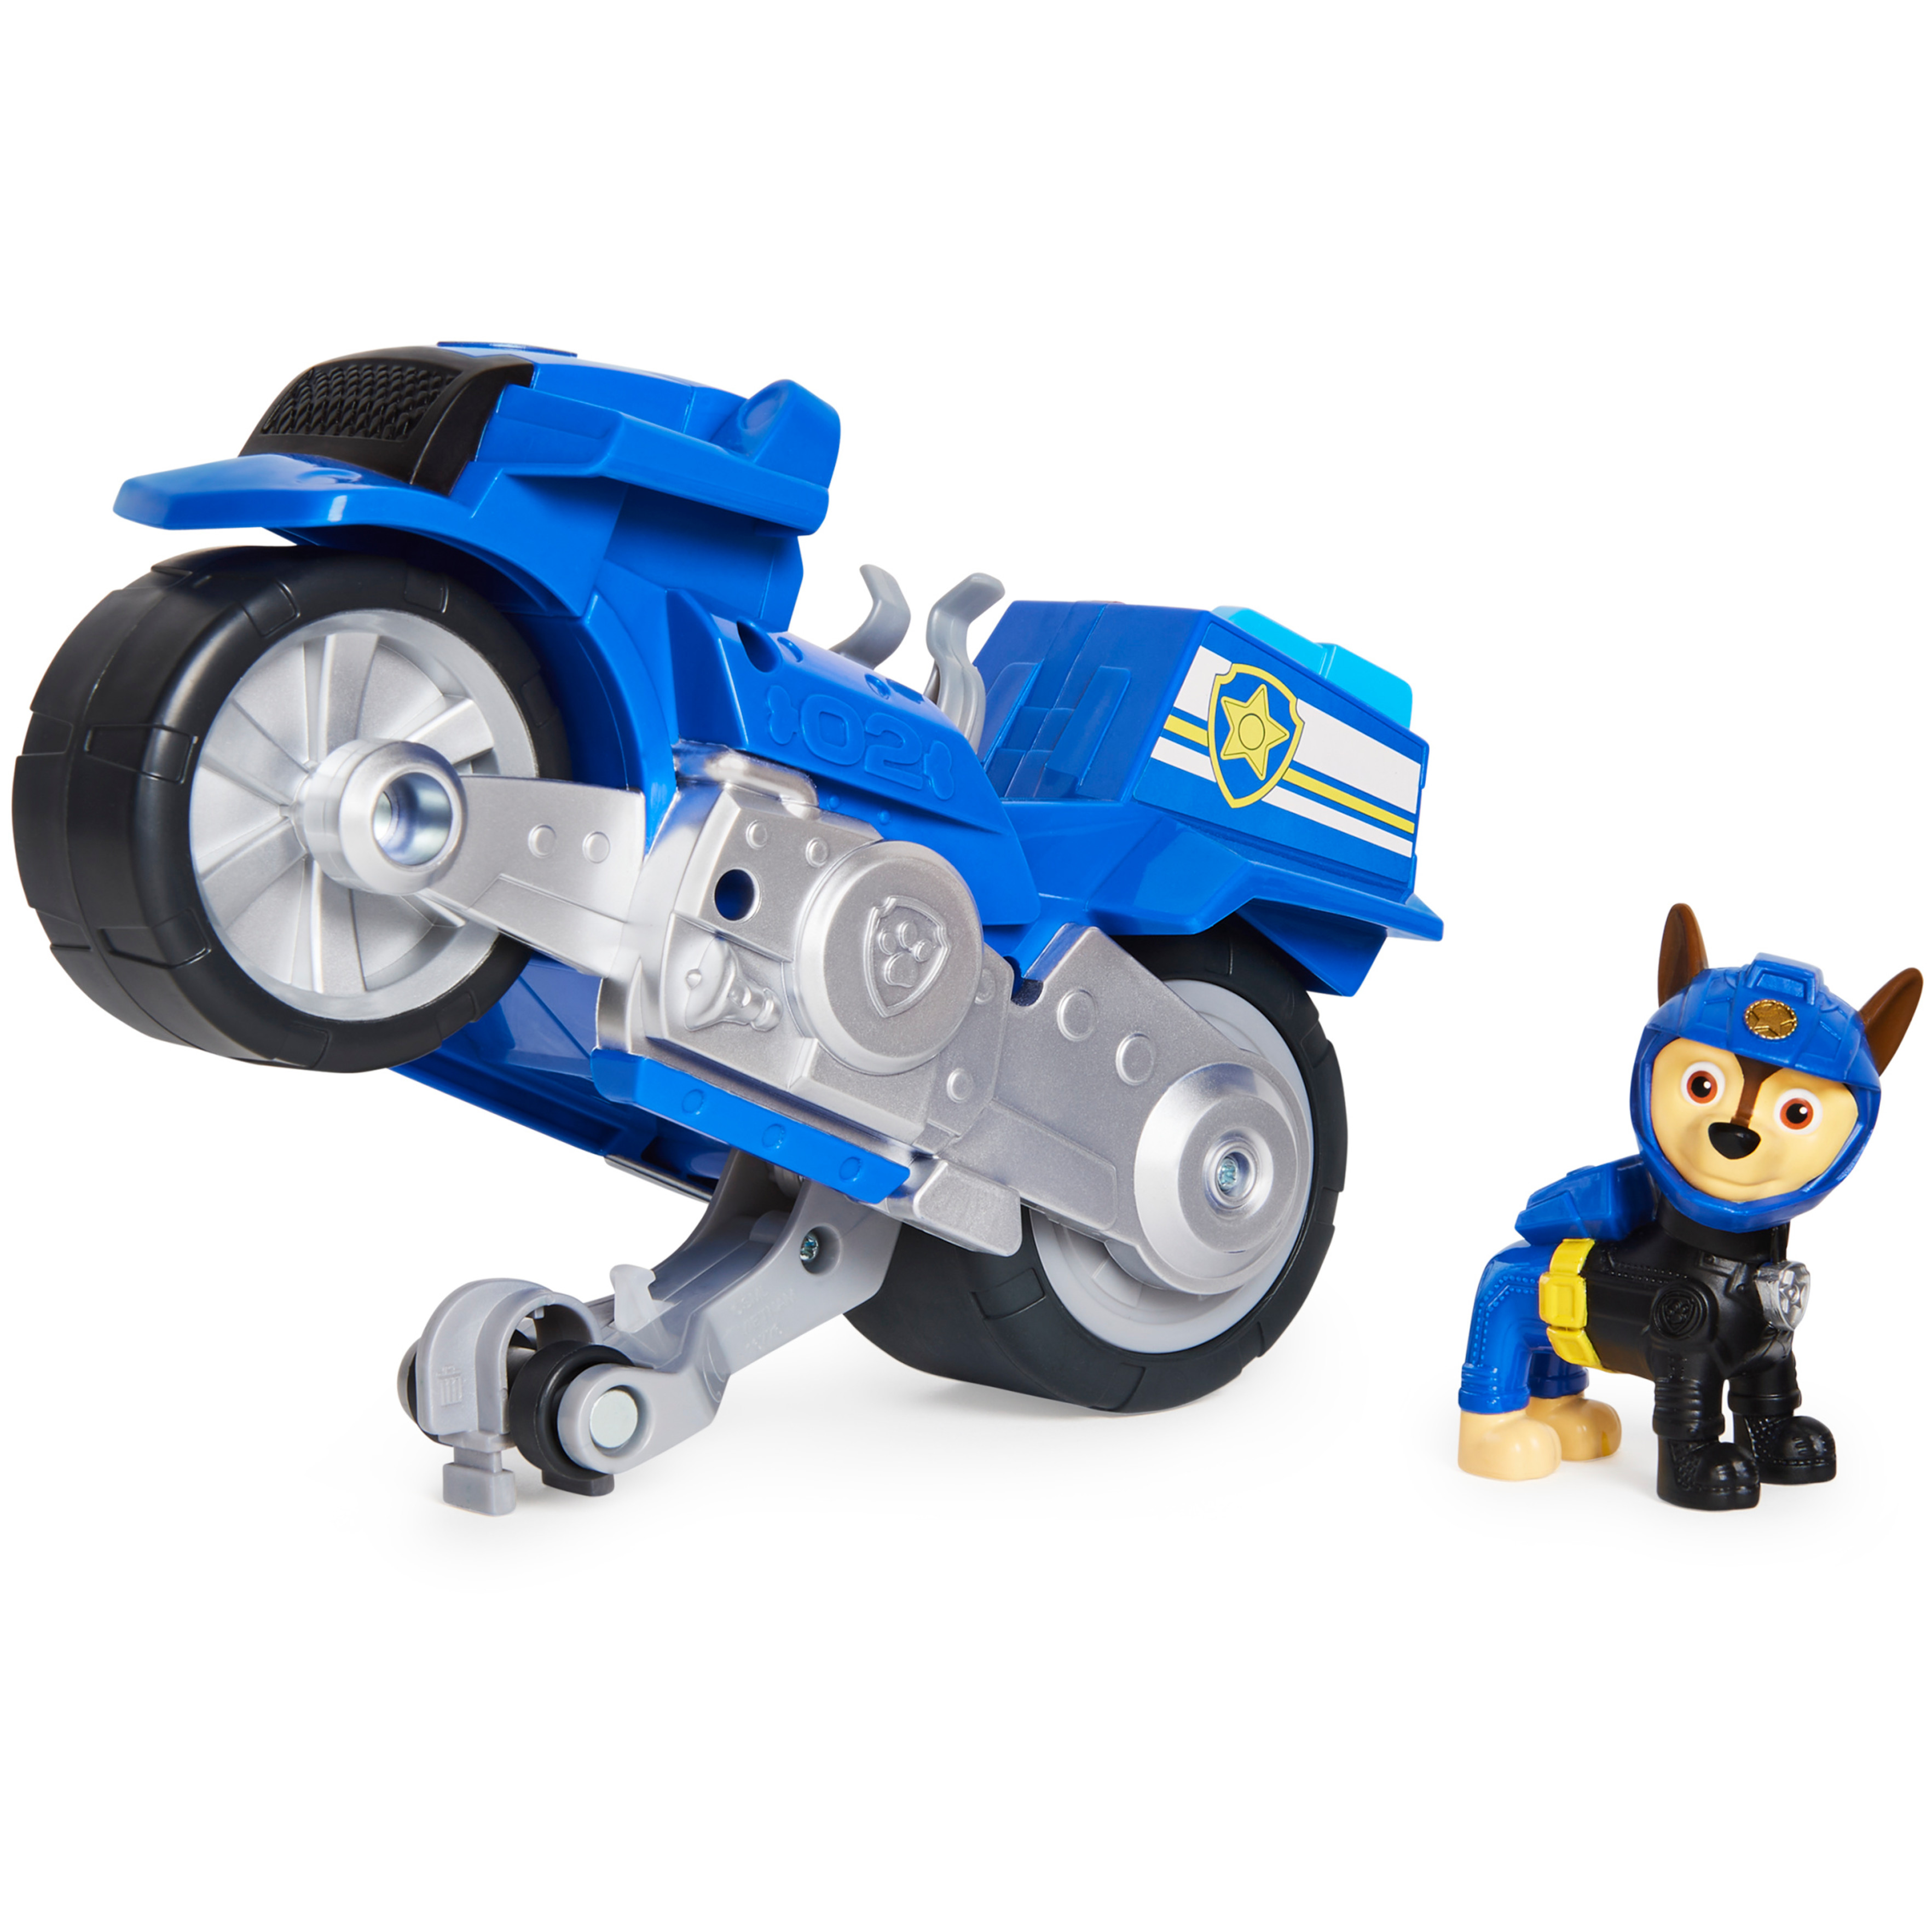 PAW Patrol, Moto Pups Chase’s Deluxe Pull Back Motorcycle Vehicle with Wheelie Feature and Figure - image 1 of 7